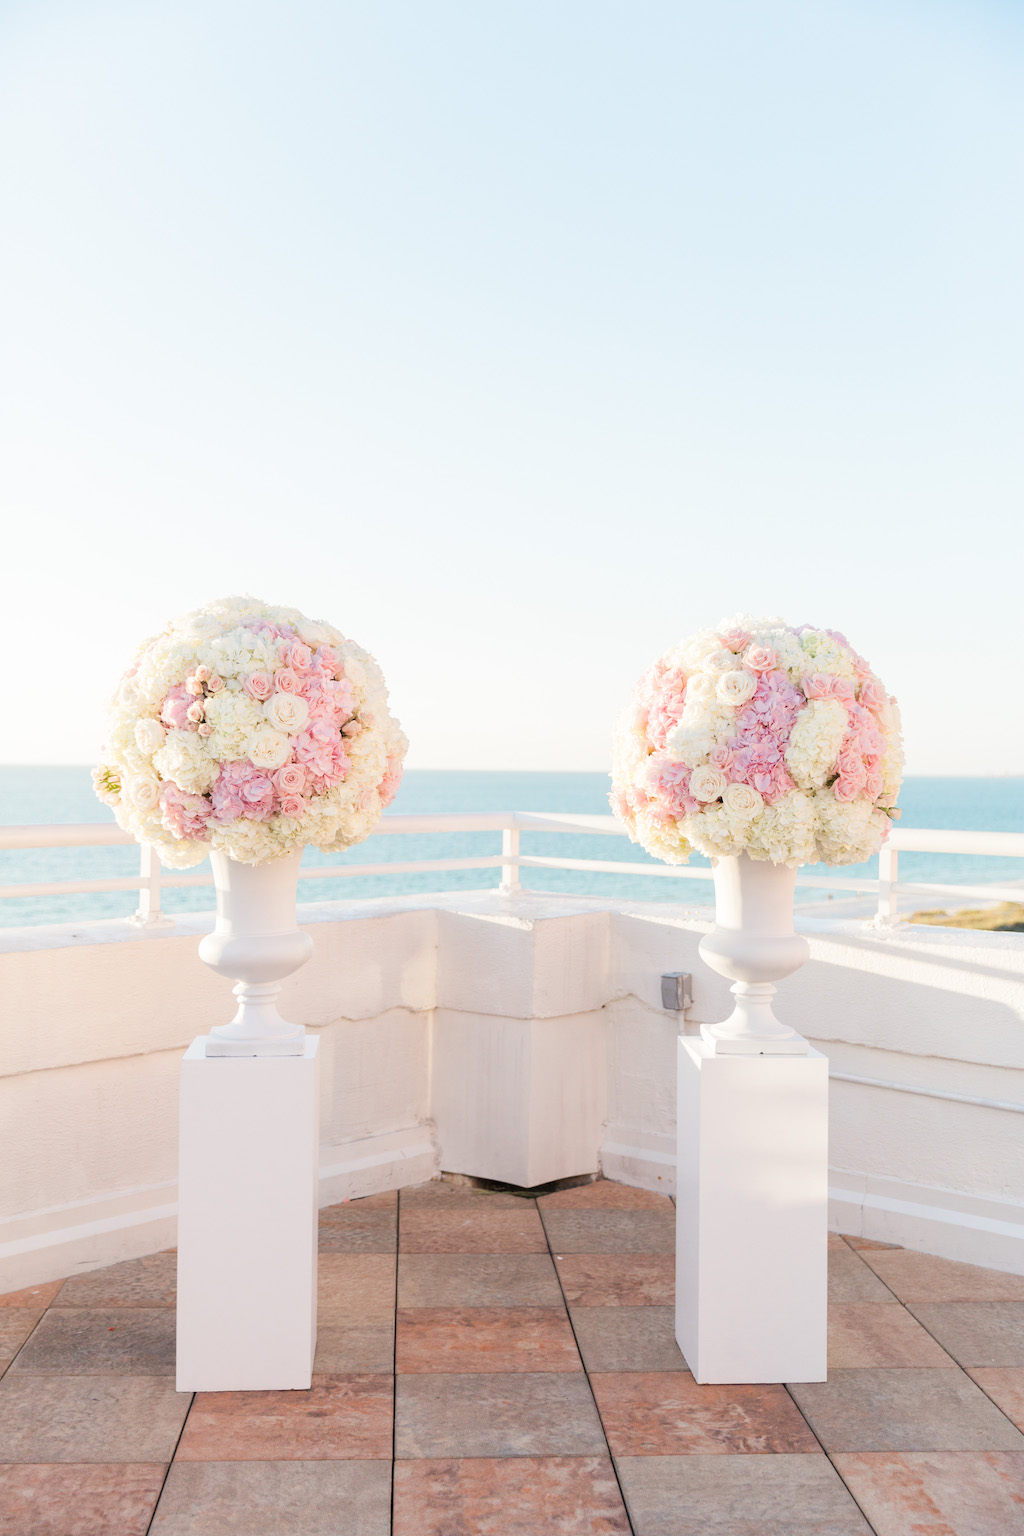 Outdoor Hotel Rooftop Wedding Ceremony Decor, White Pedestals with White Vases and Pink and White Rose Bouquets | St. Petersburg Wedding Venue The Don Cesar